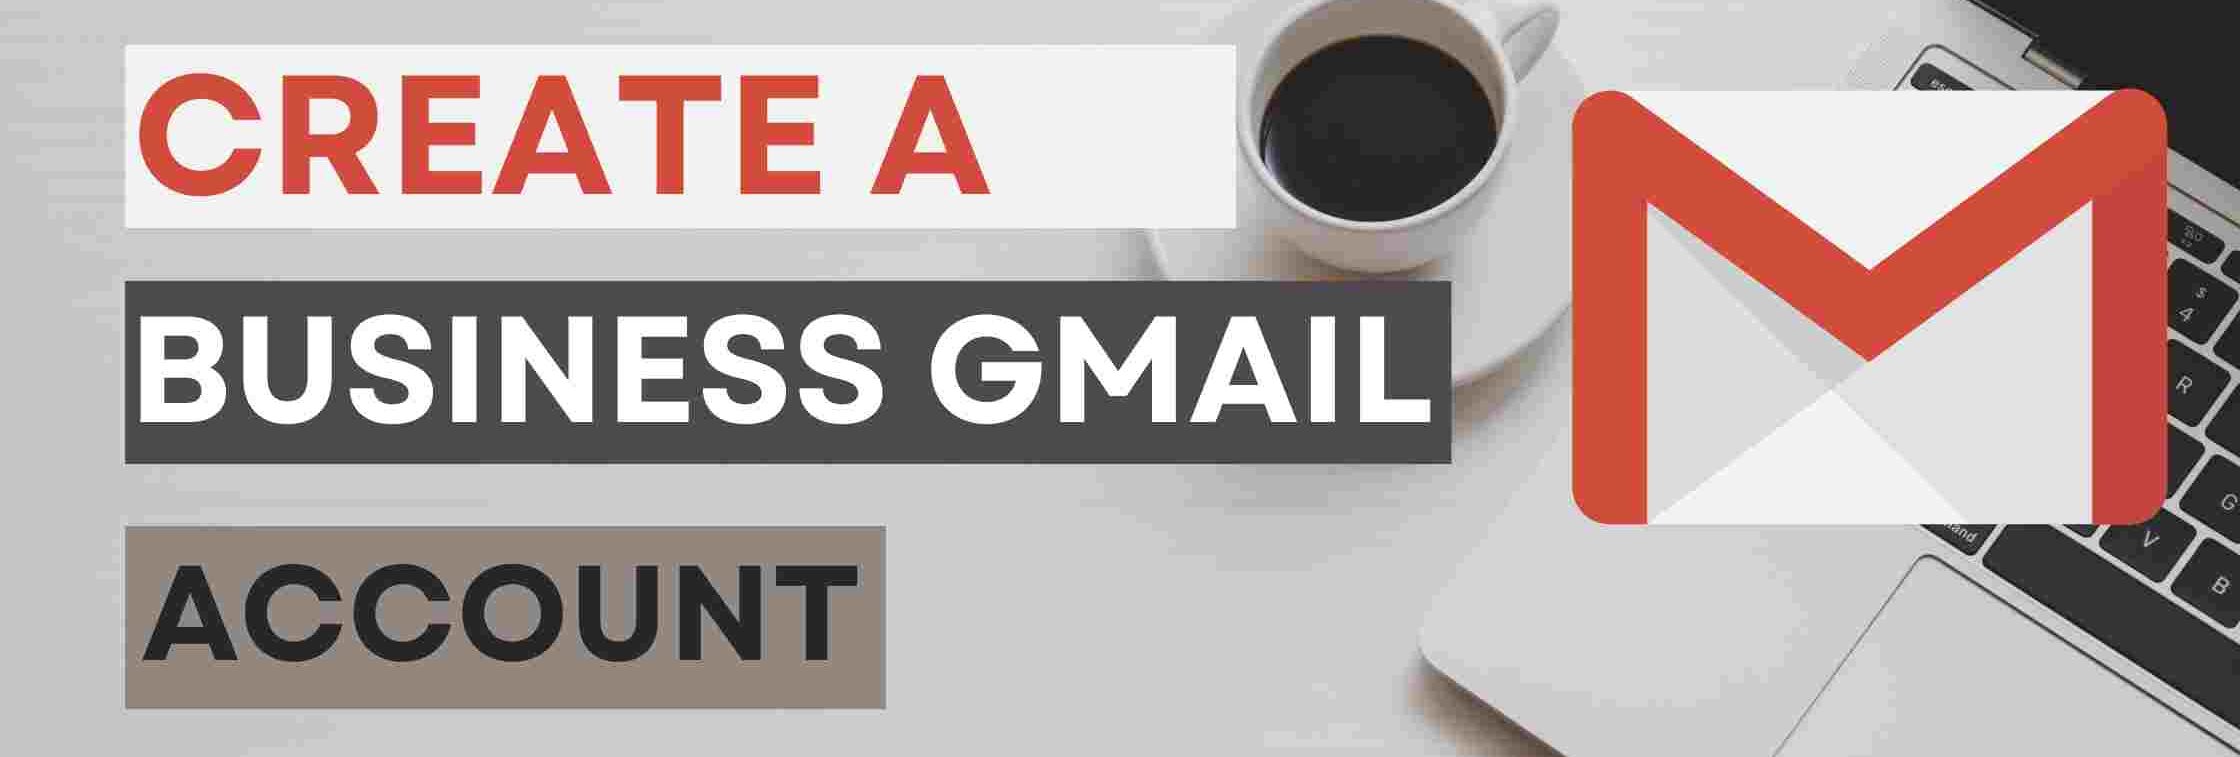 Steps to Create a Business Gmail Account